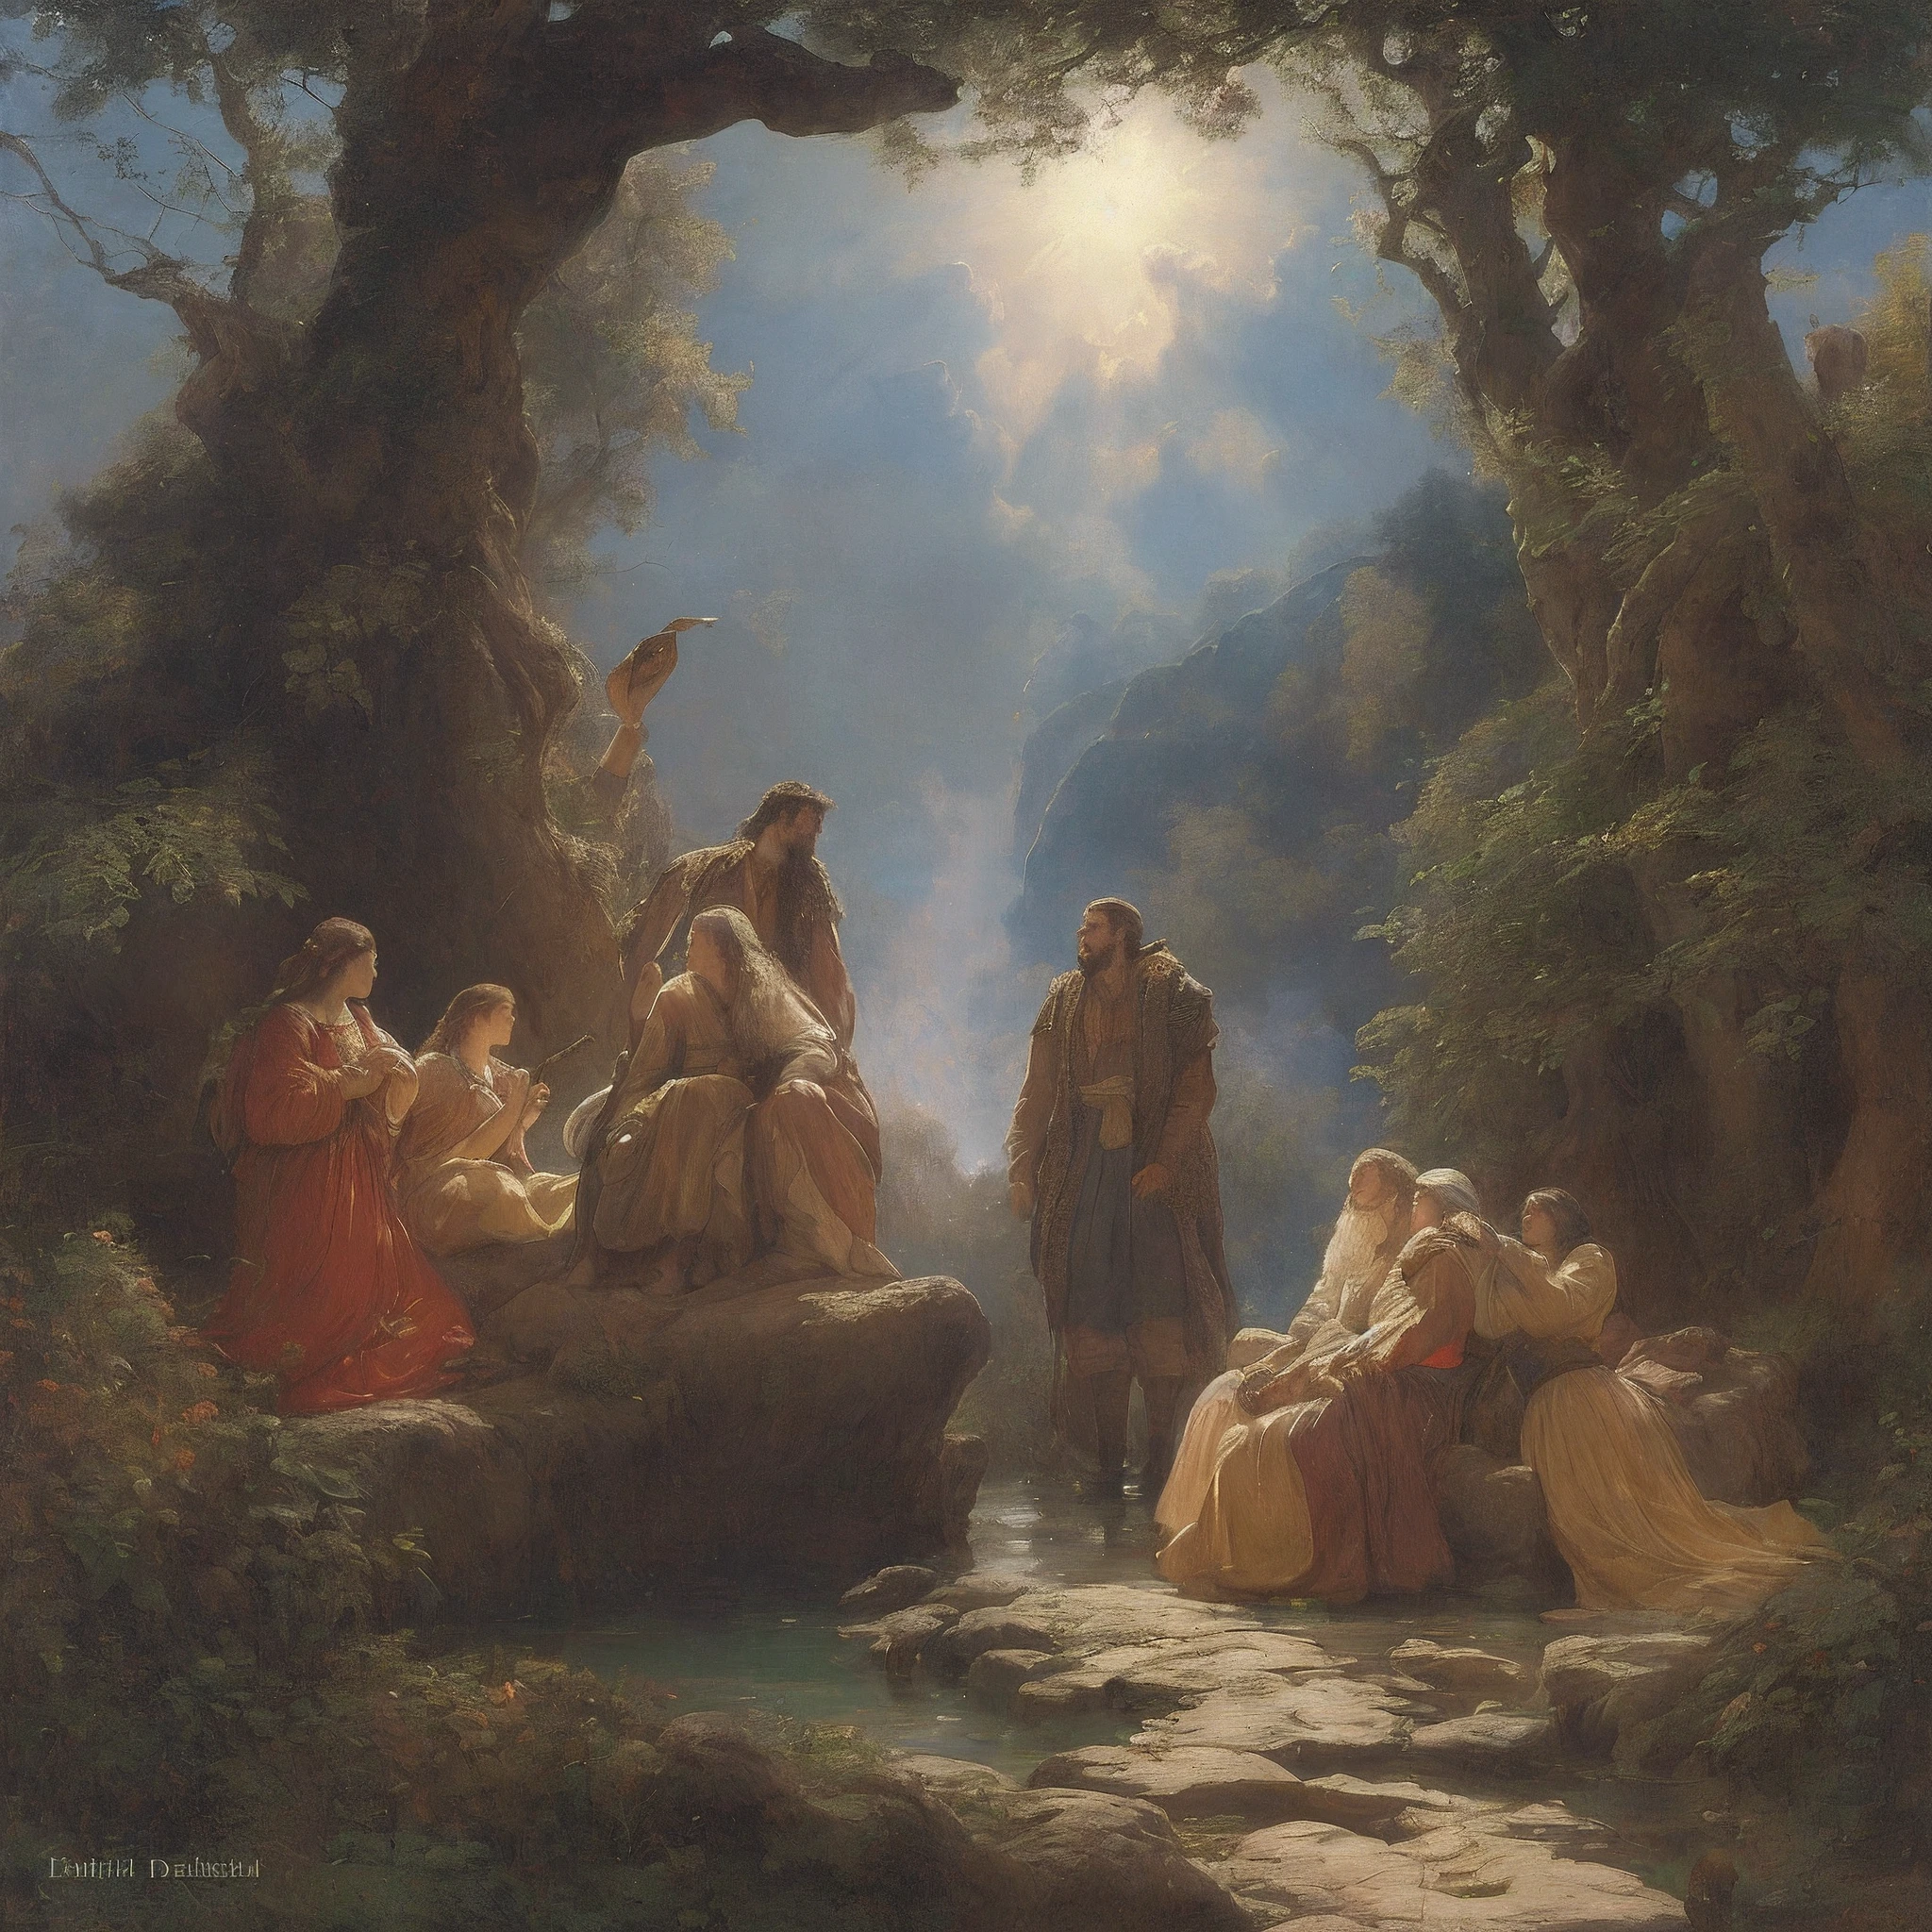 painting of a group of people sitting on a rock in a forest, inspired by Carl Heinrich Bloch, inspired by Théodore Chasseriau, Arte de Edouard Bisson, kramskoi 4 k, Mystical scene, romanticism painting, Directed by: Emile Lahner, Tuomas Korpi e Wlop, albert bierstadt and artgerm